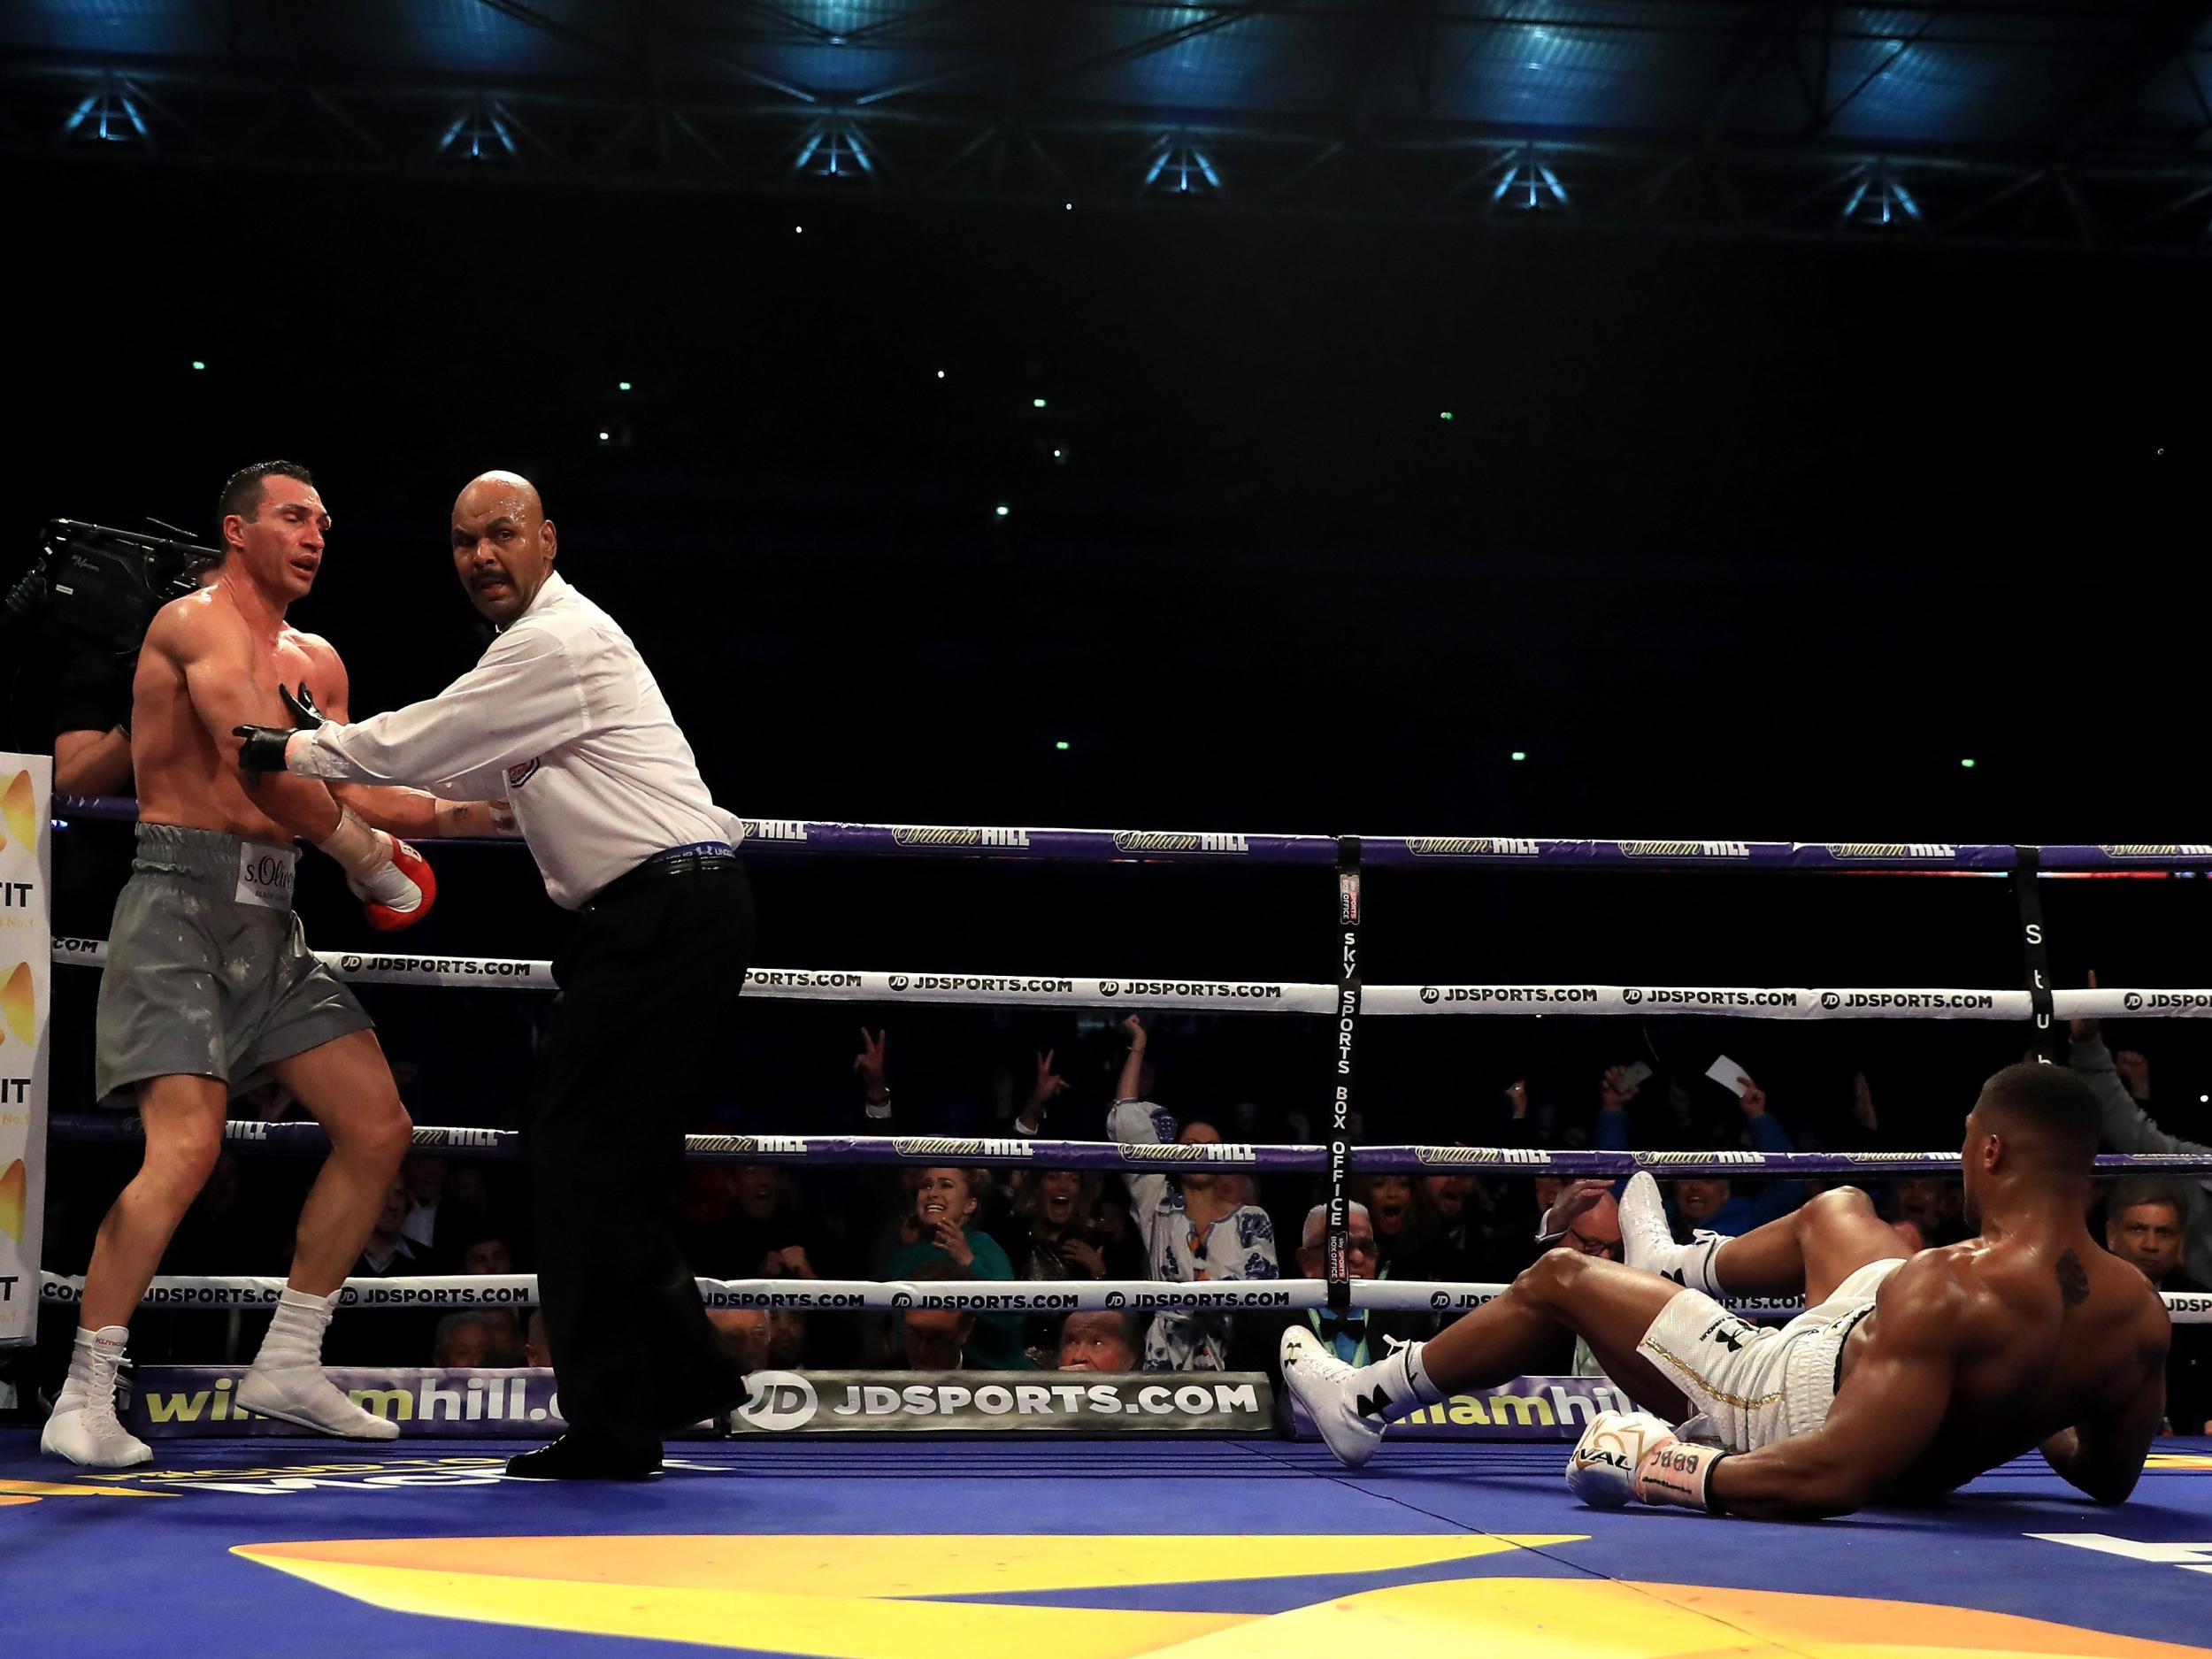 &#13;
Klitschko thought he'd done enough to put Joshua away in the sixth &#13;